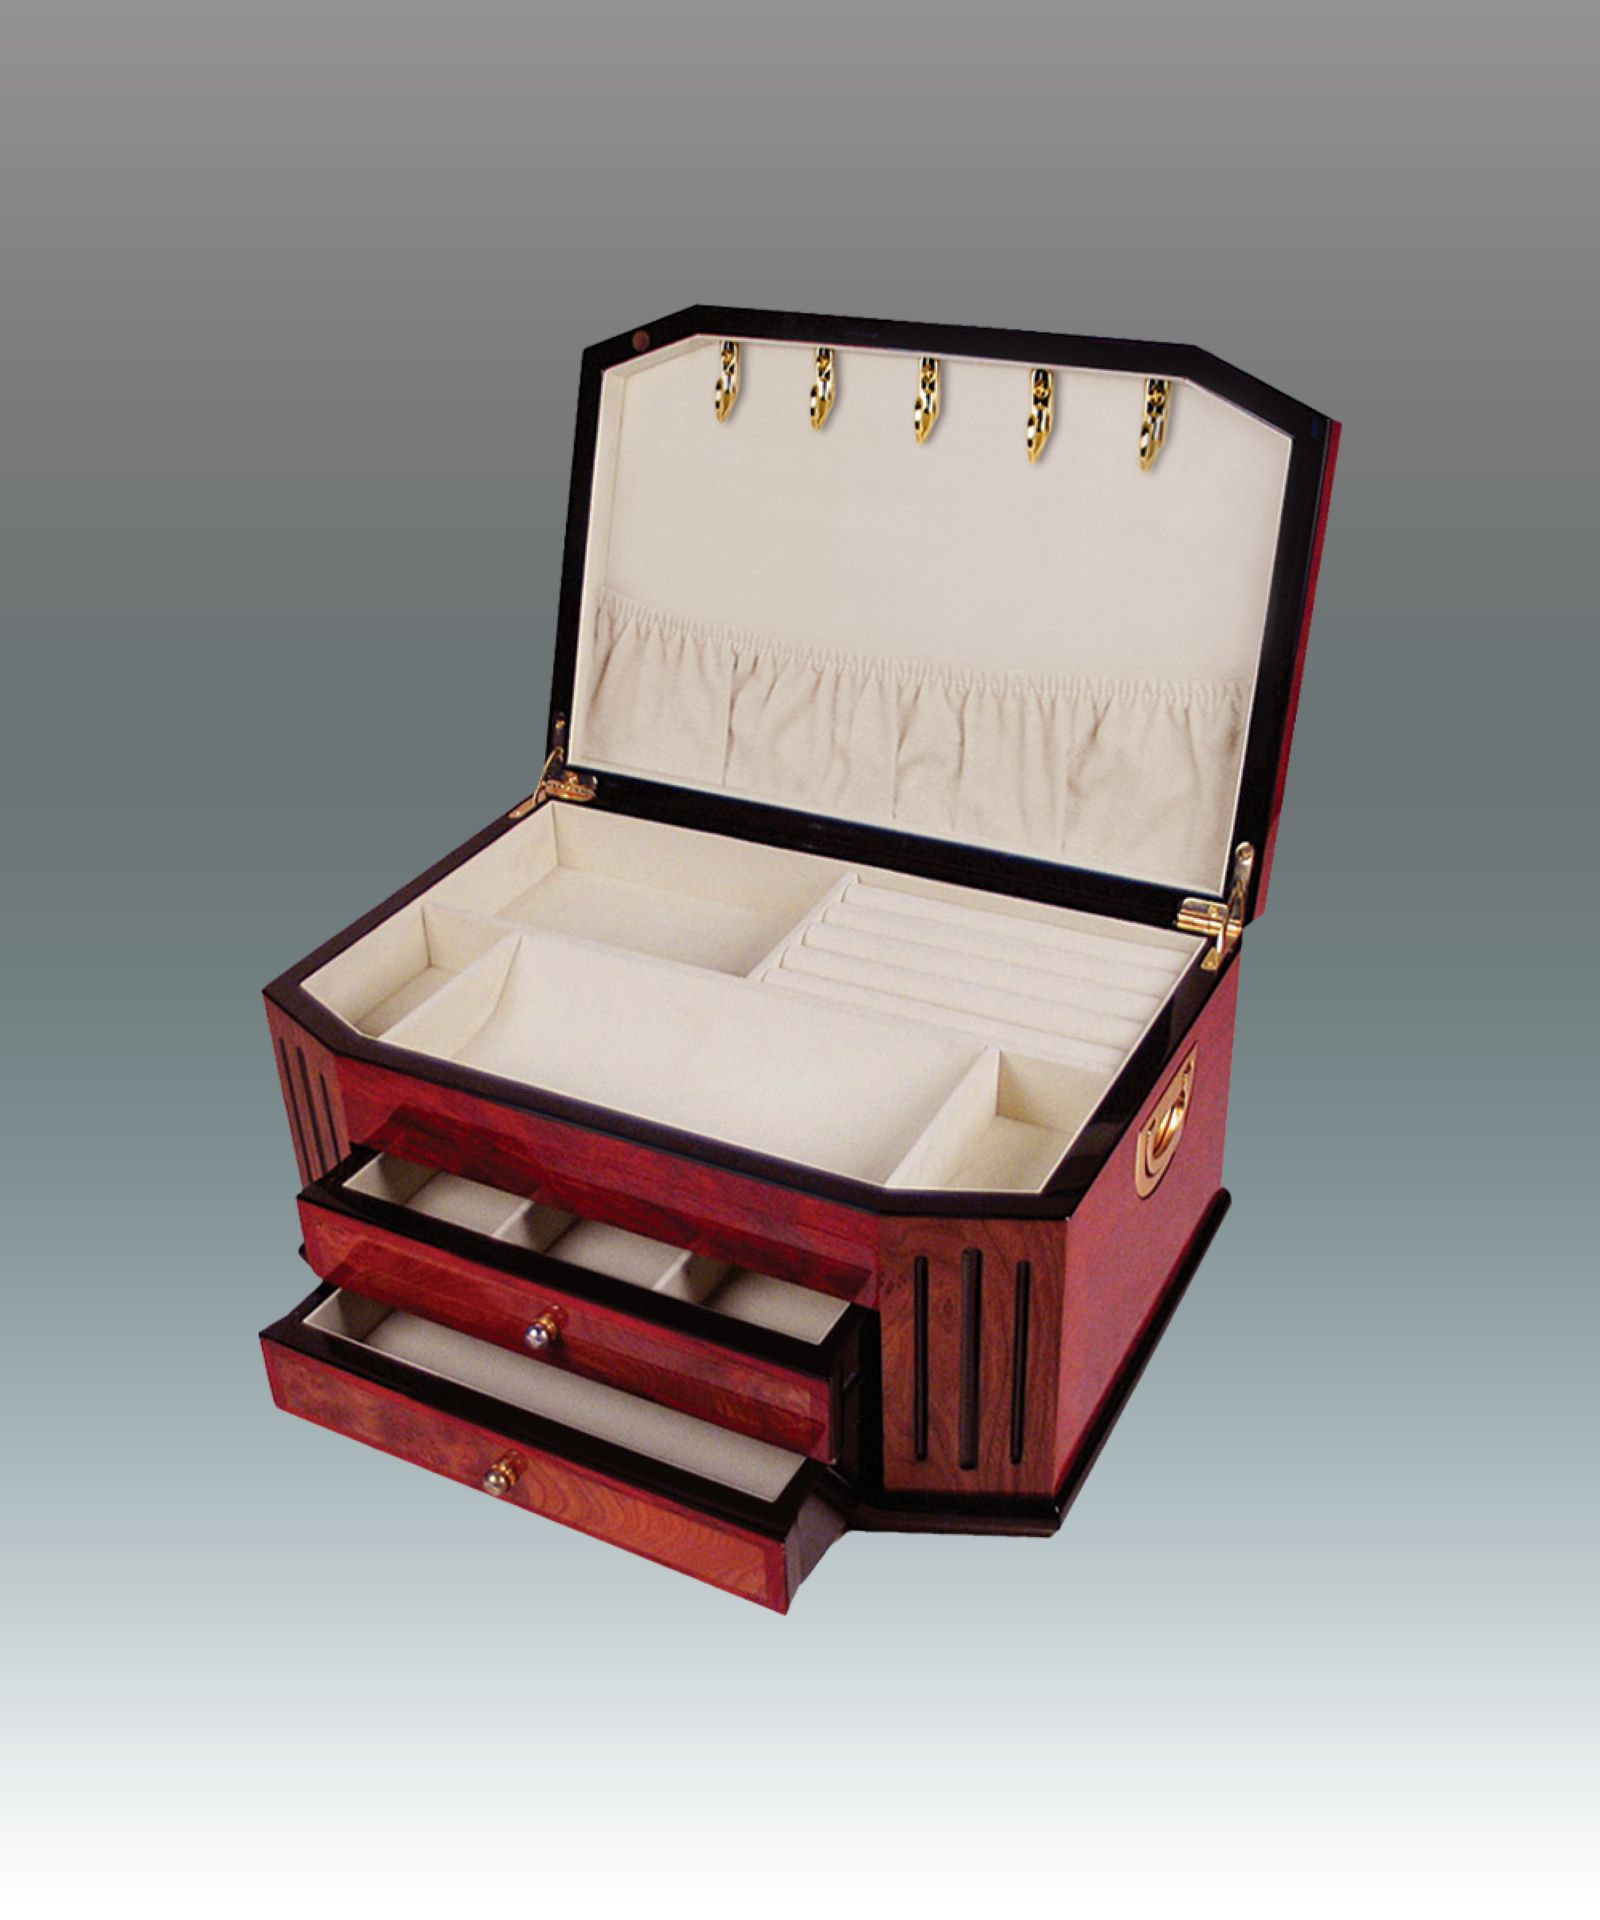 Two-Tone Jewelry Box with Handles – 2 Drawer